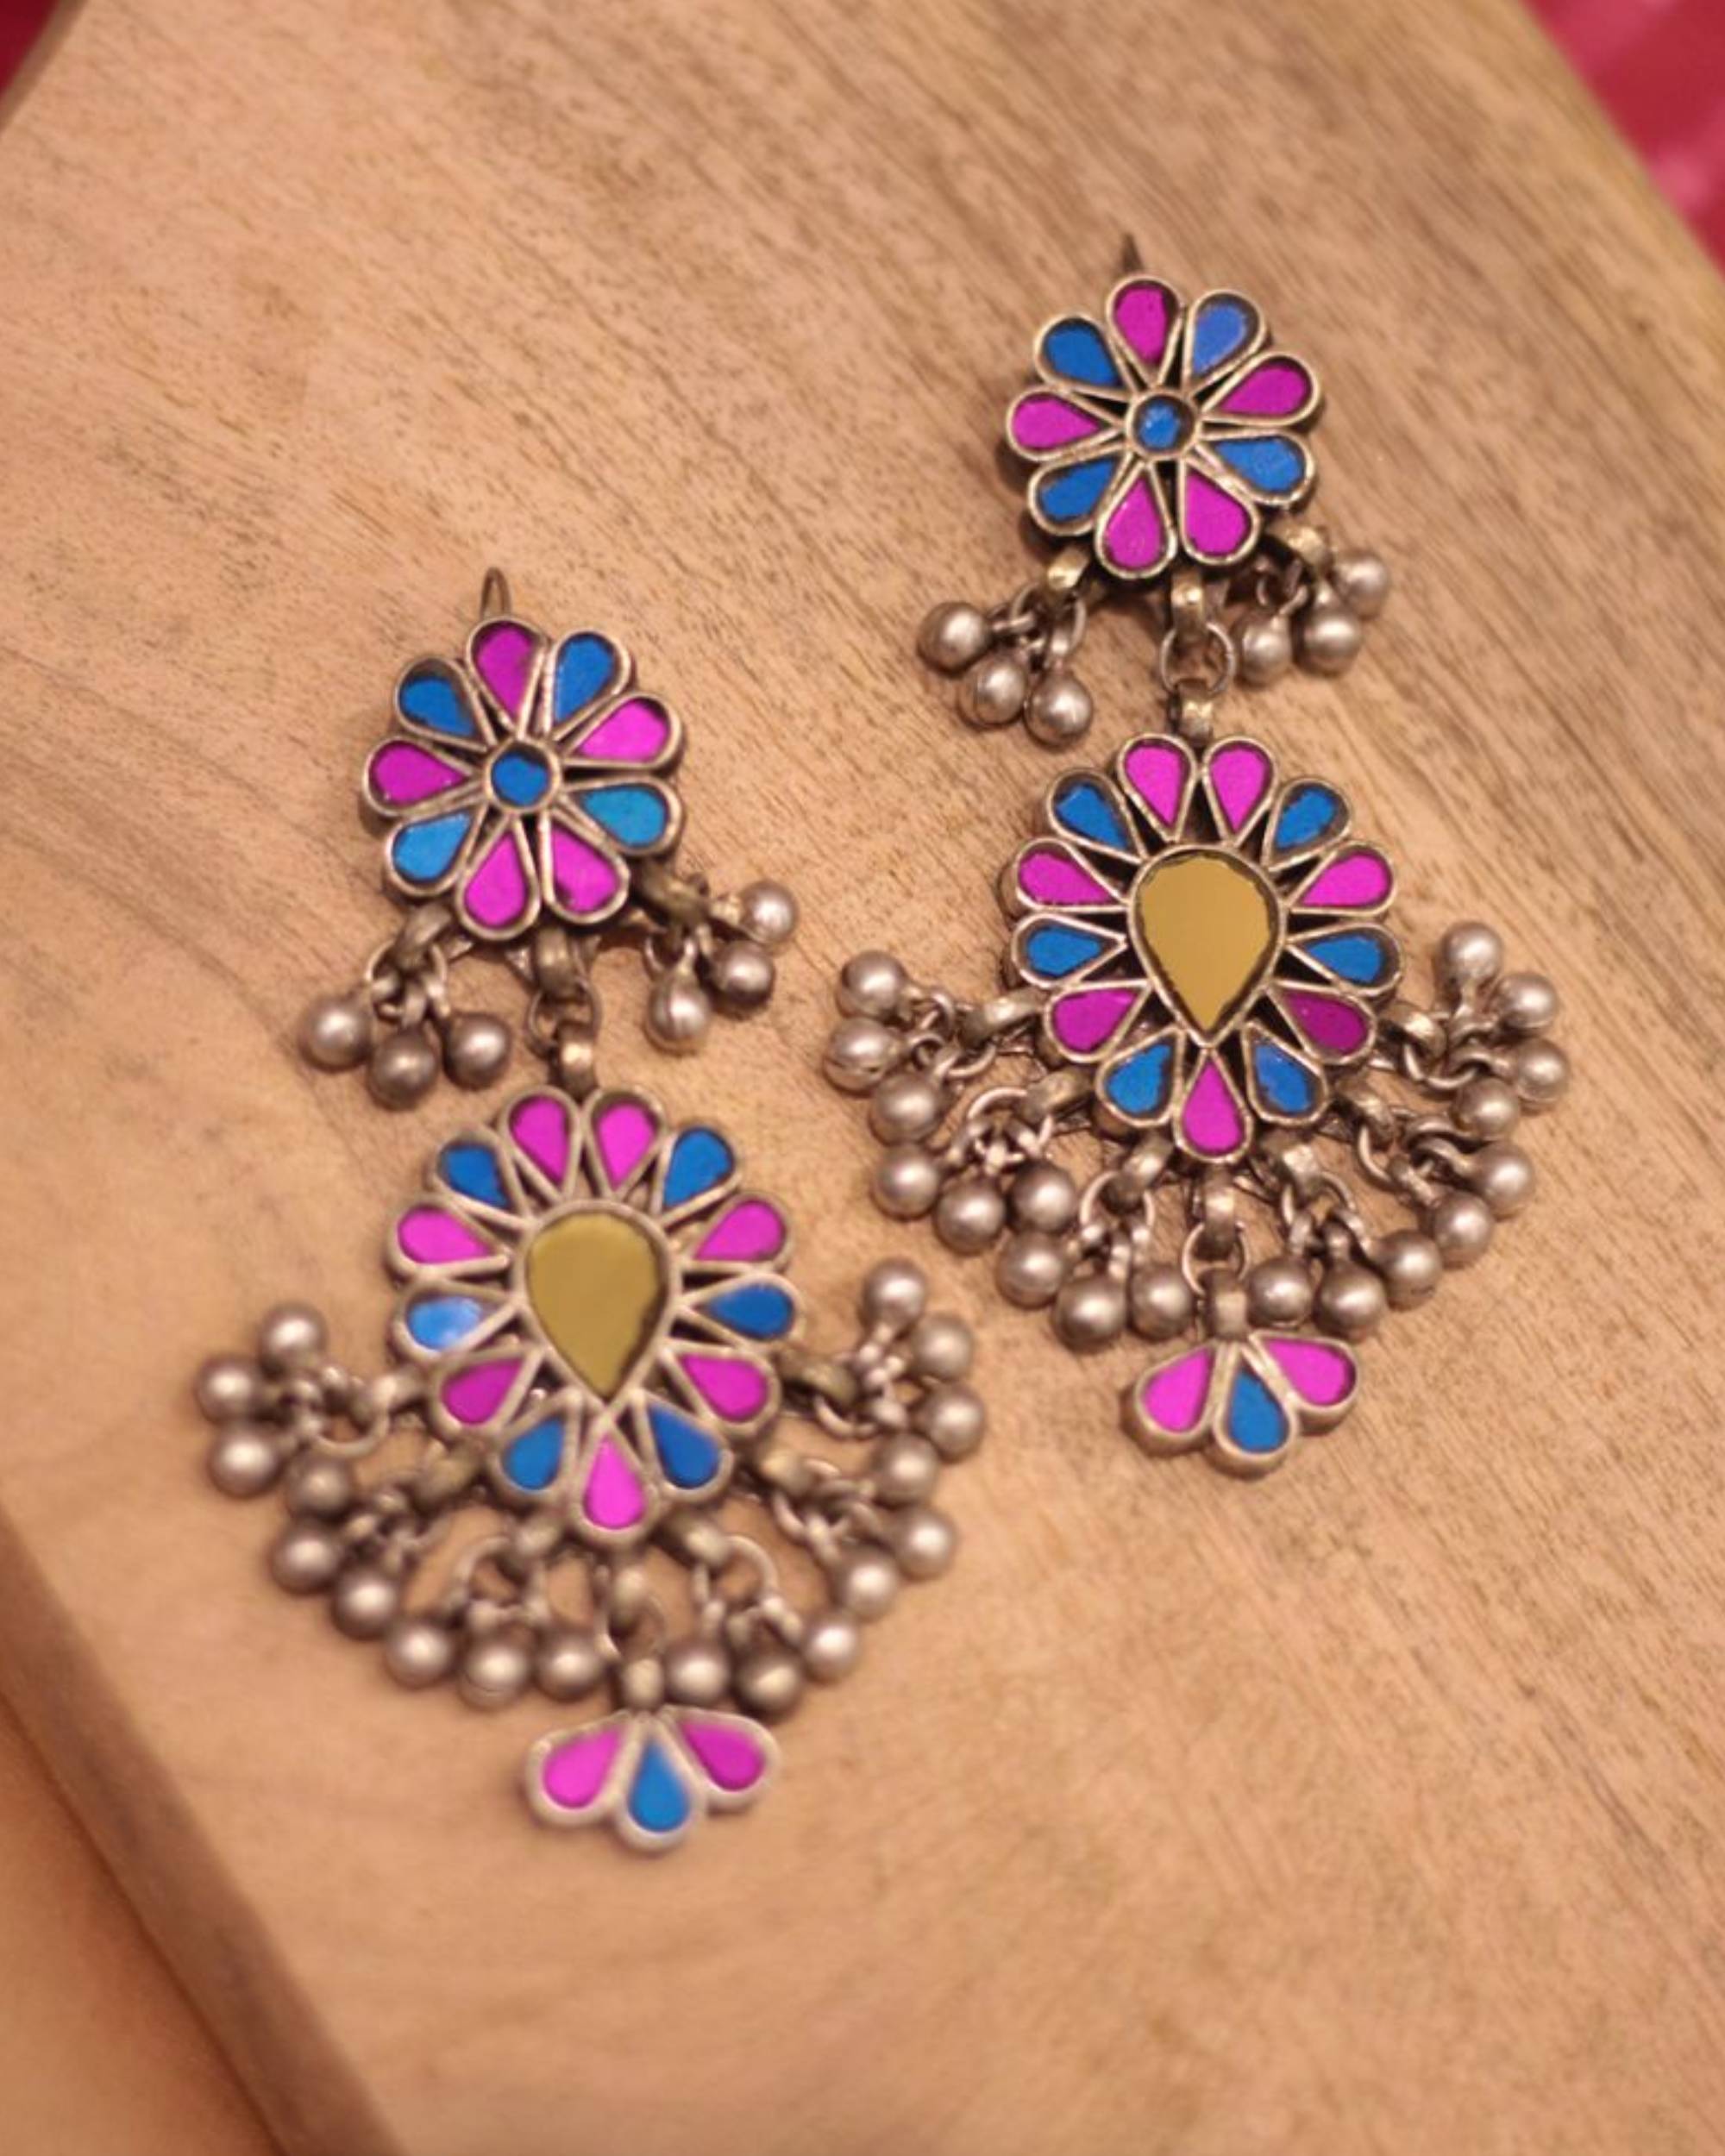 Pink and violet floral earrings